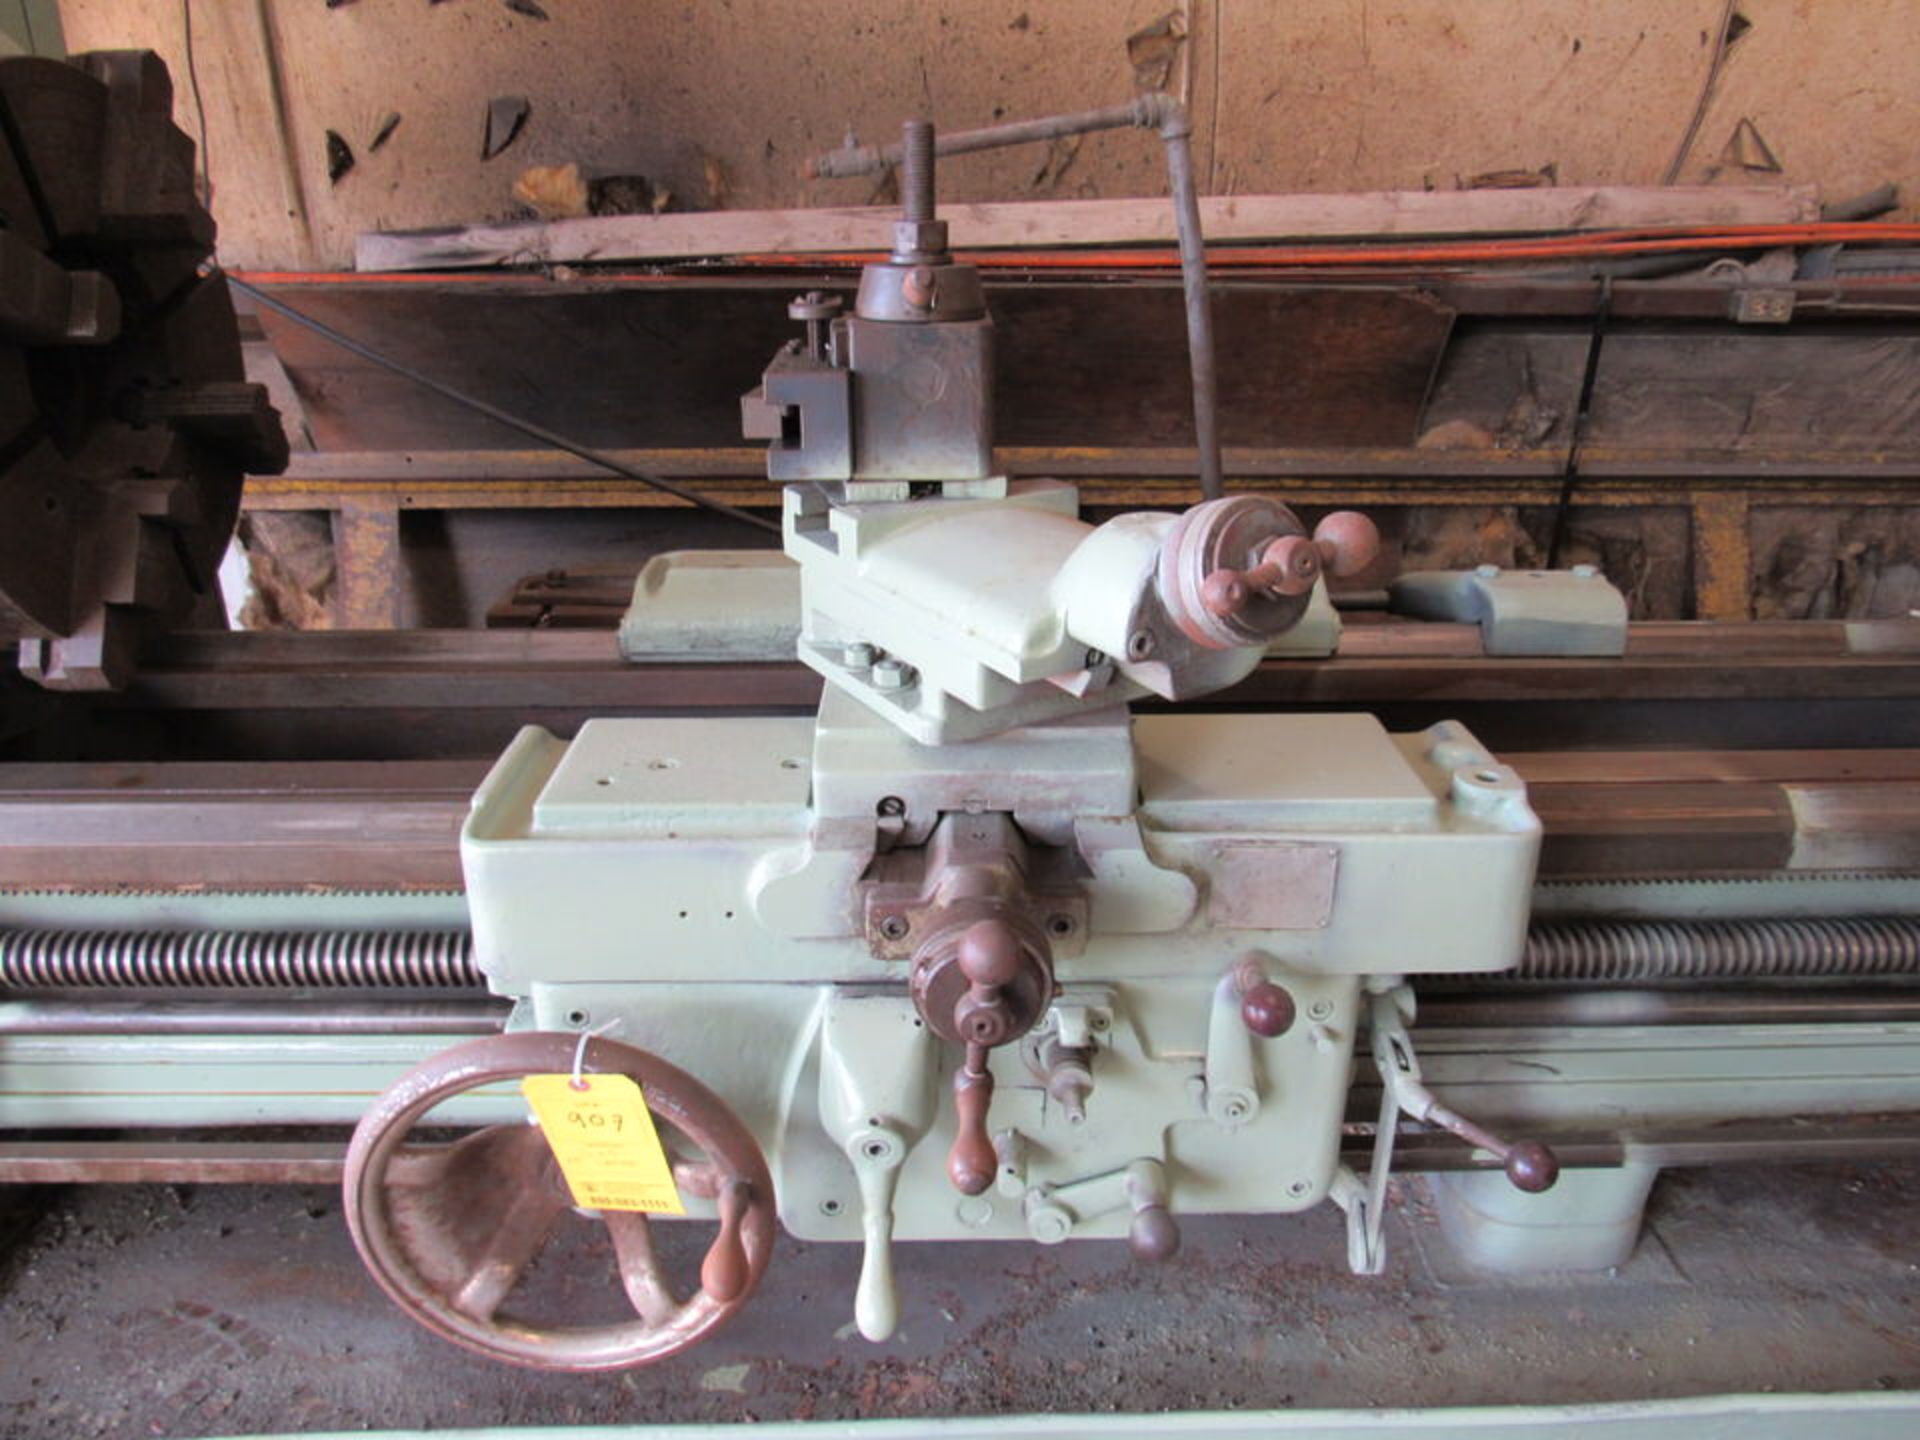 Lodge & Shipley 25" Standard Engine Lathe, 24" swing, 144" bed length, 21" 4-jaw front and rear - Image 8 of 14